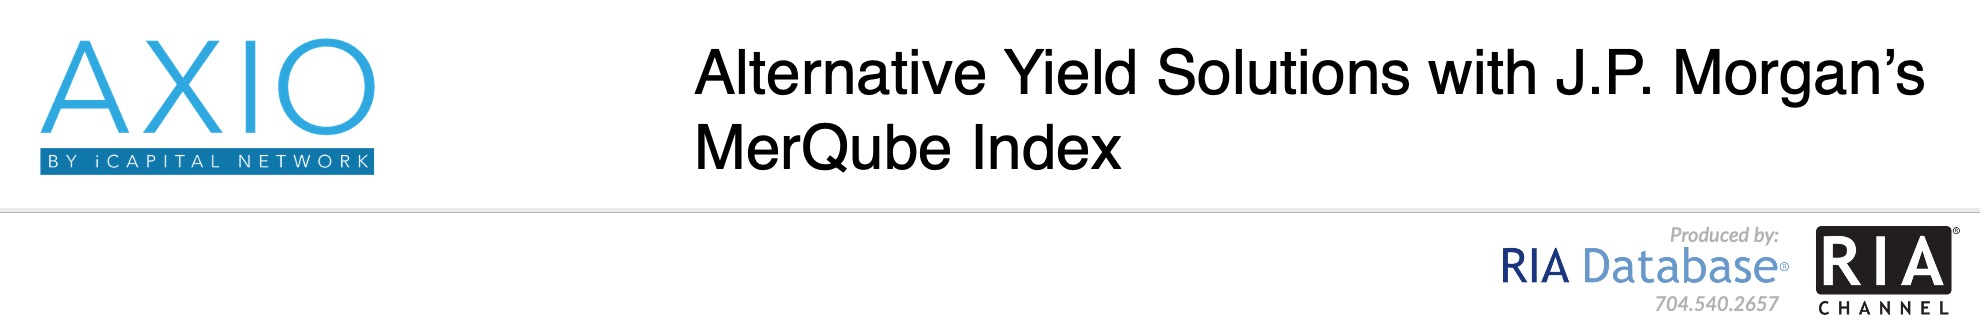 Alternative Yield Solutions with J.P. Morgan’s MerQube Index